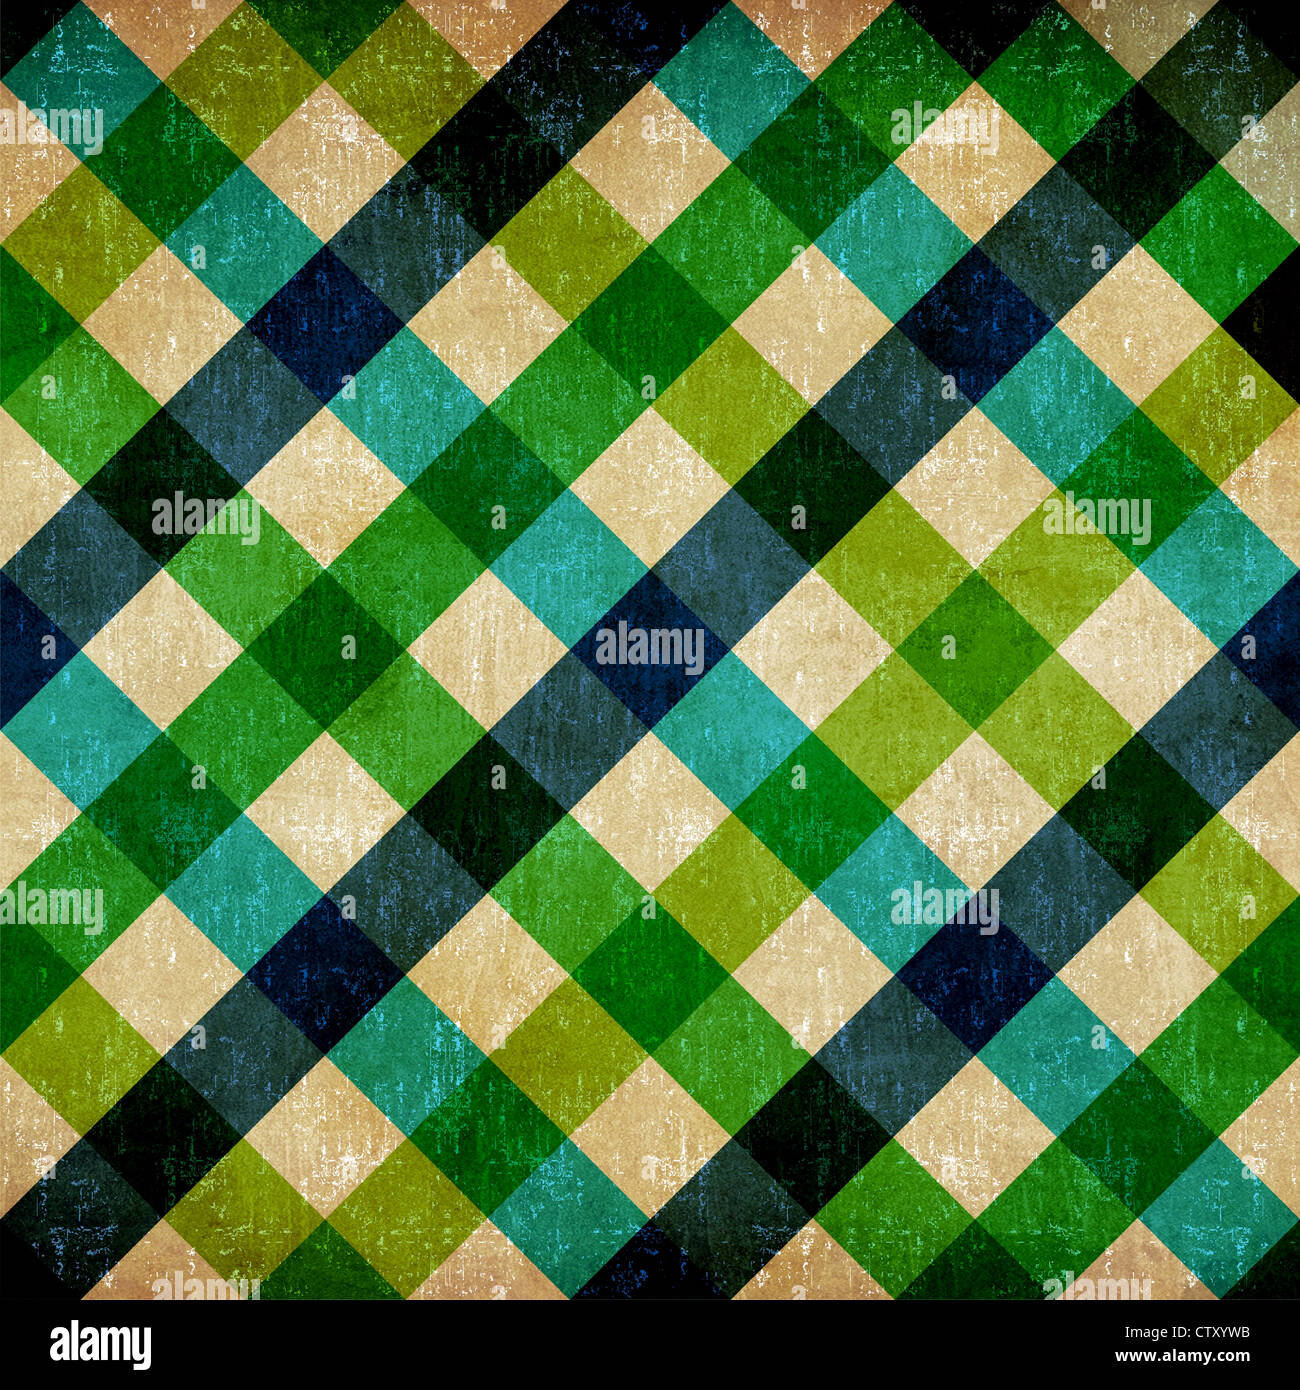 Vintage restaurant tablecloth seamless pattern background. Stock Photo